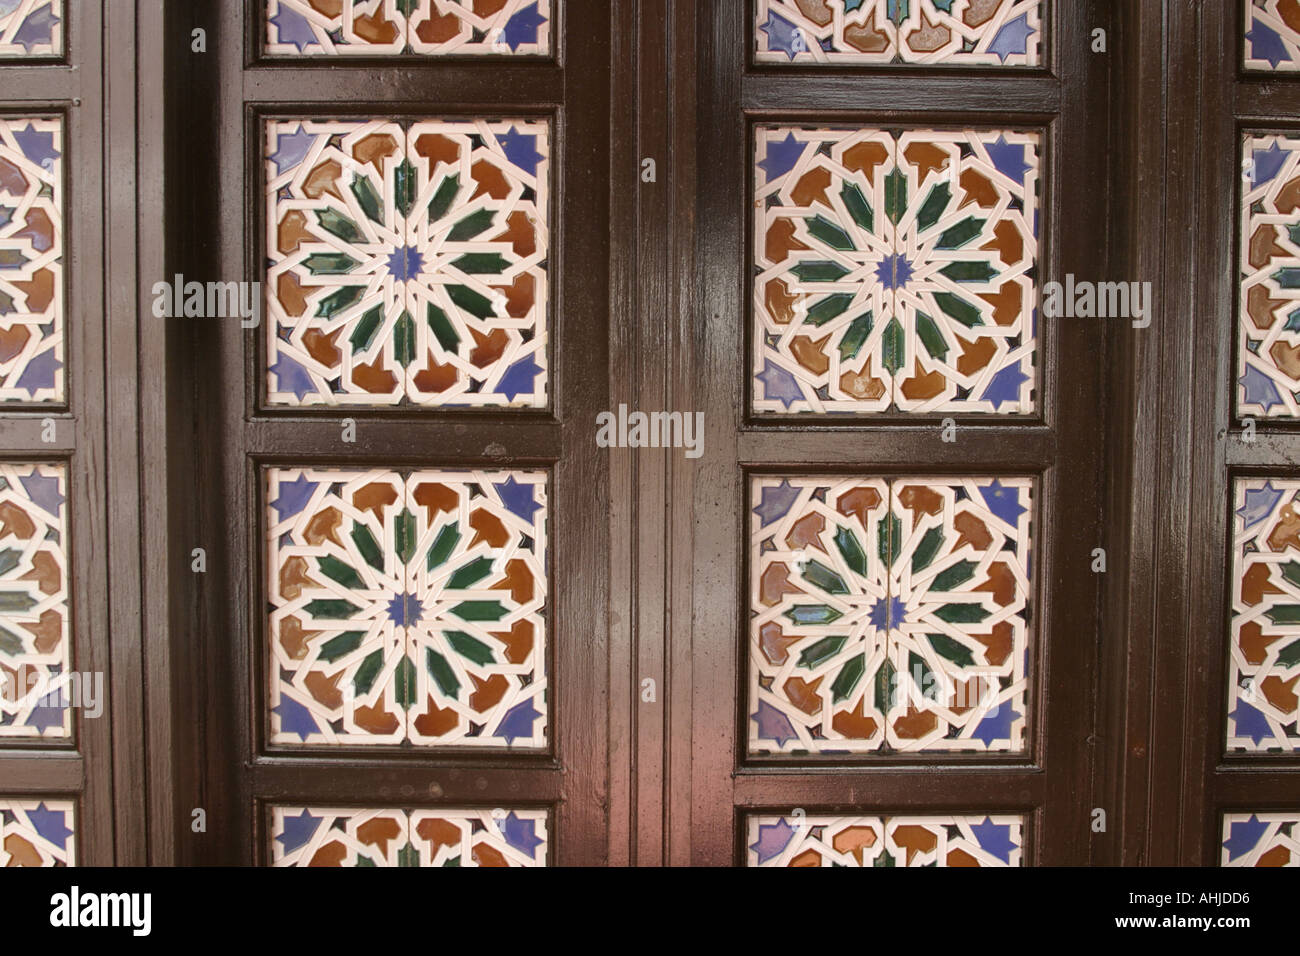 Andalusia Spain Moorish influenced architectural detail Stock Photo